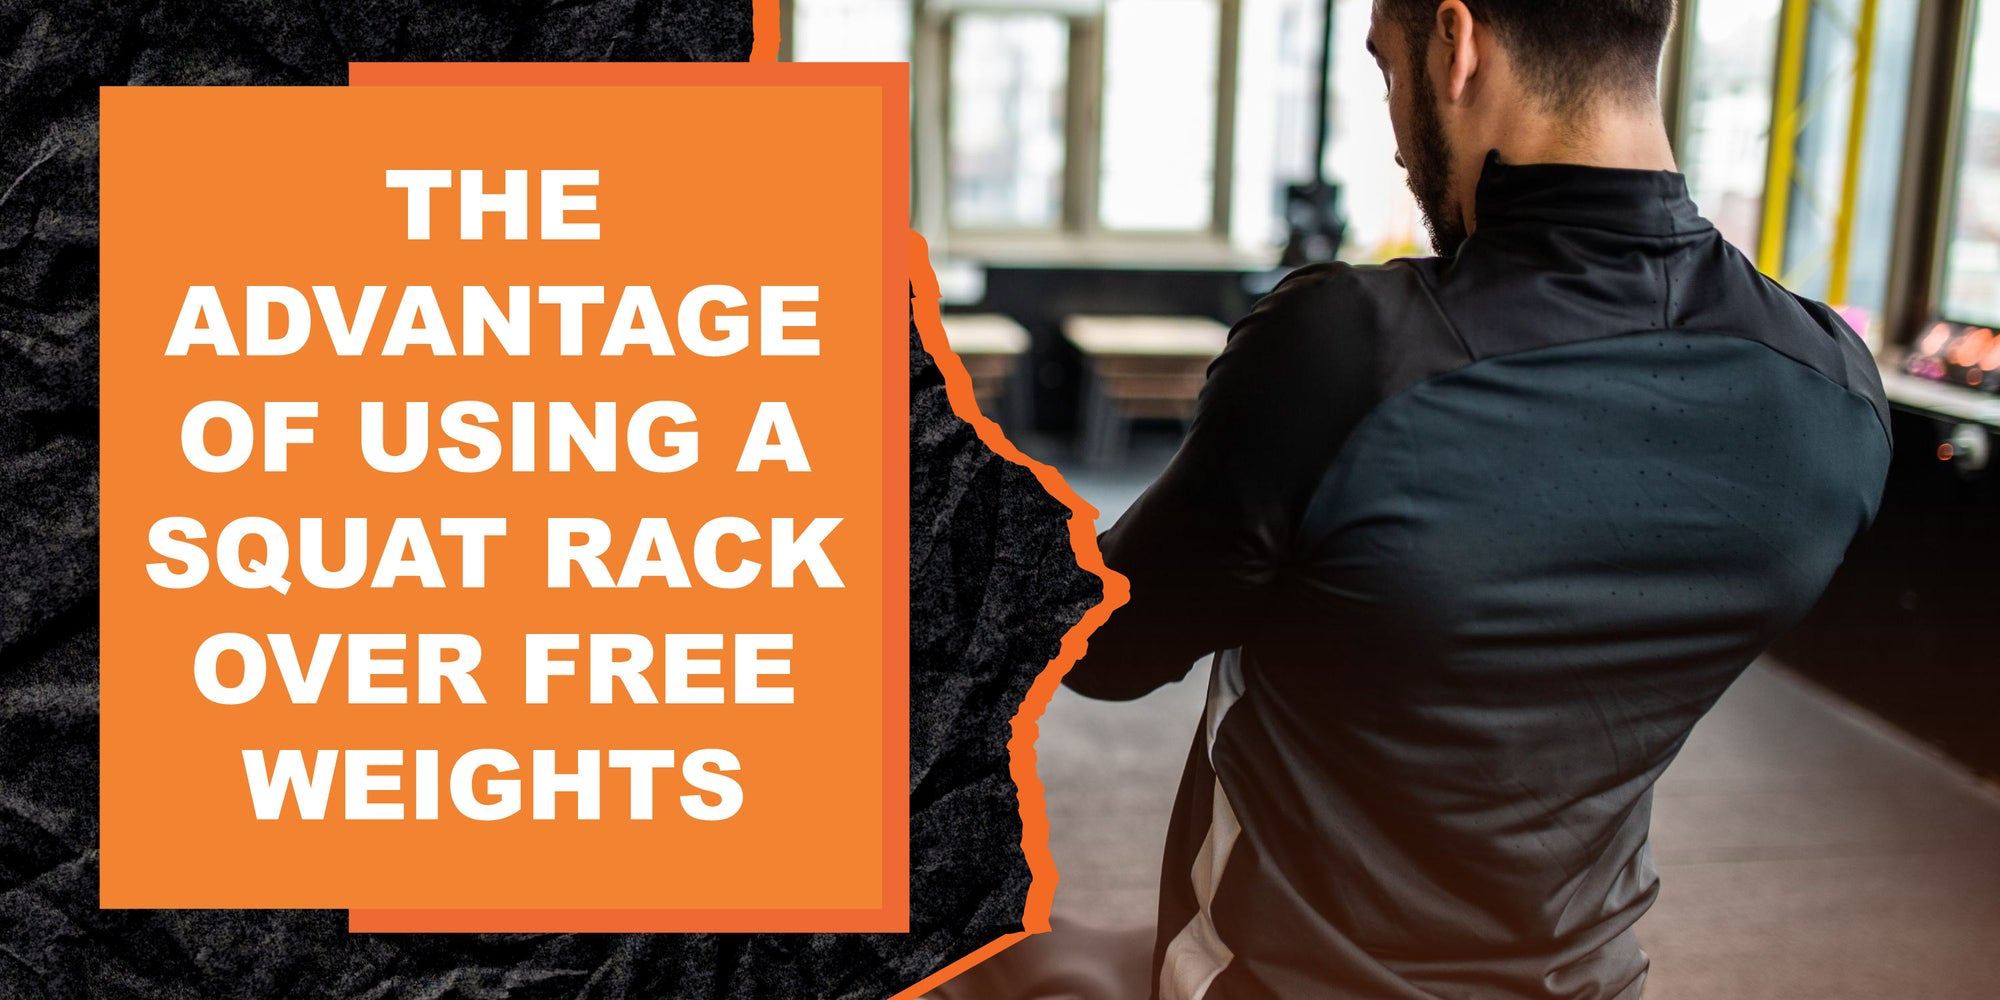 The Advantage of Using a Squat Rack Over Free Weights